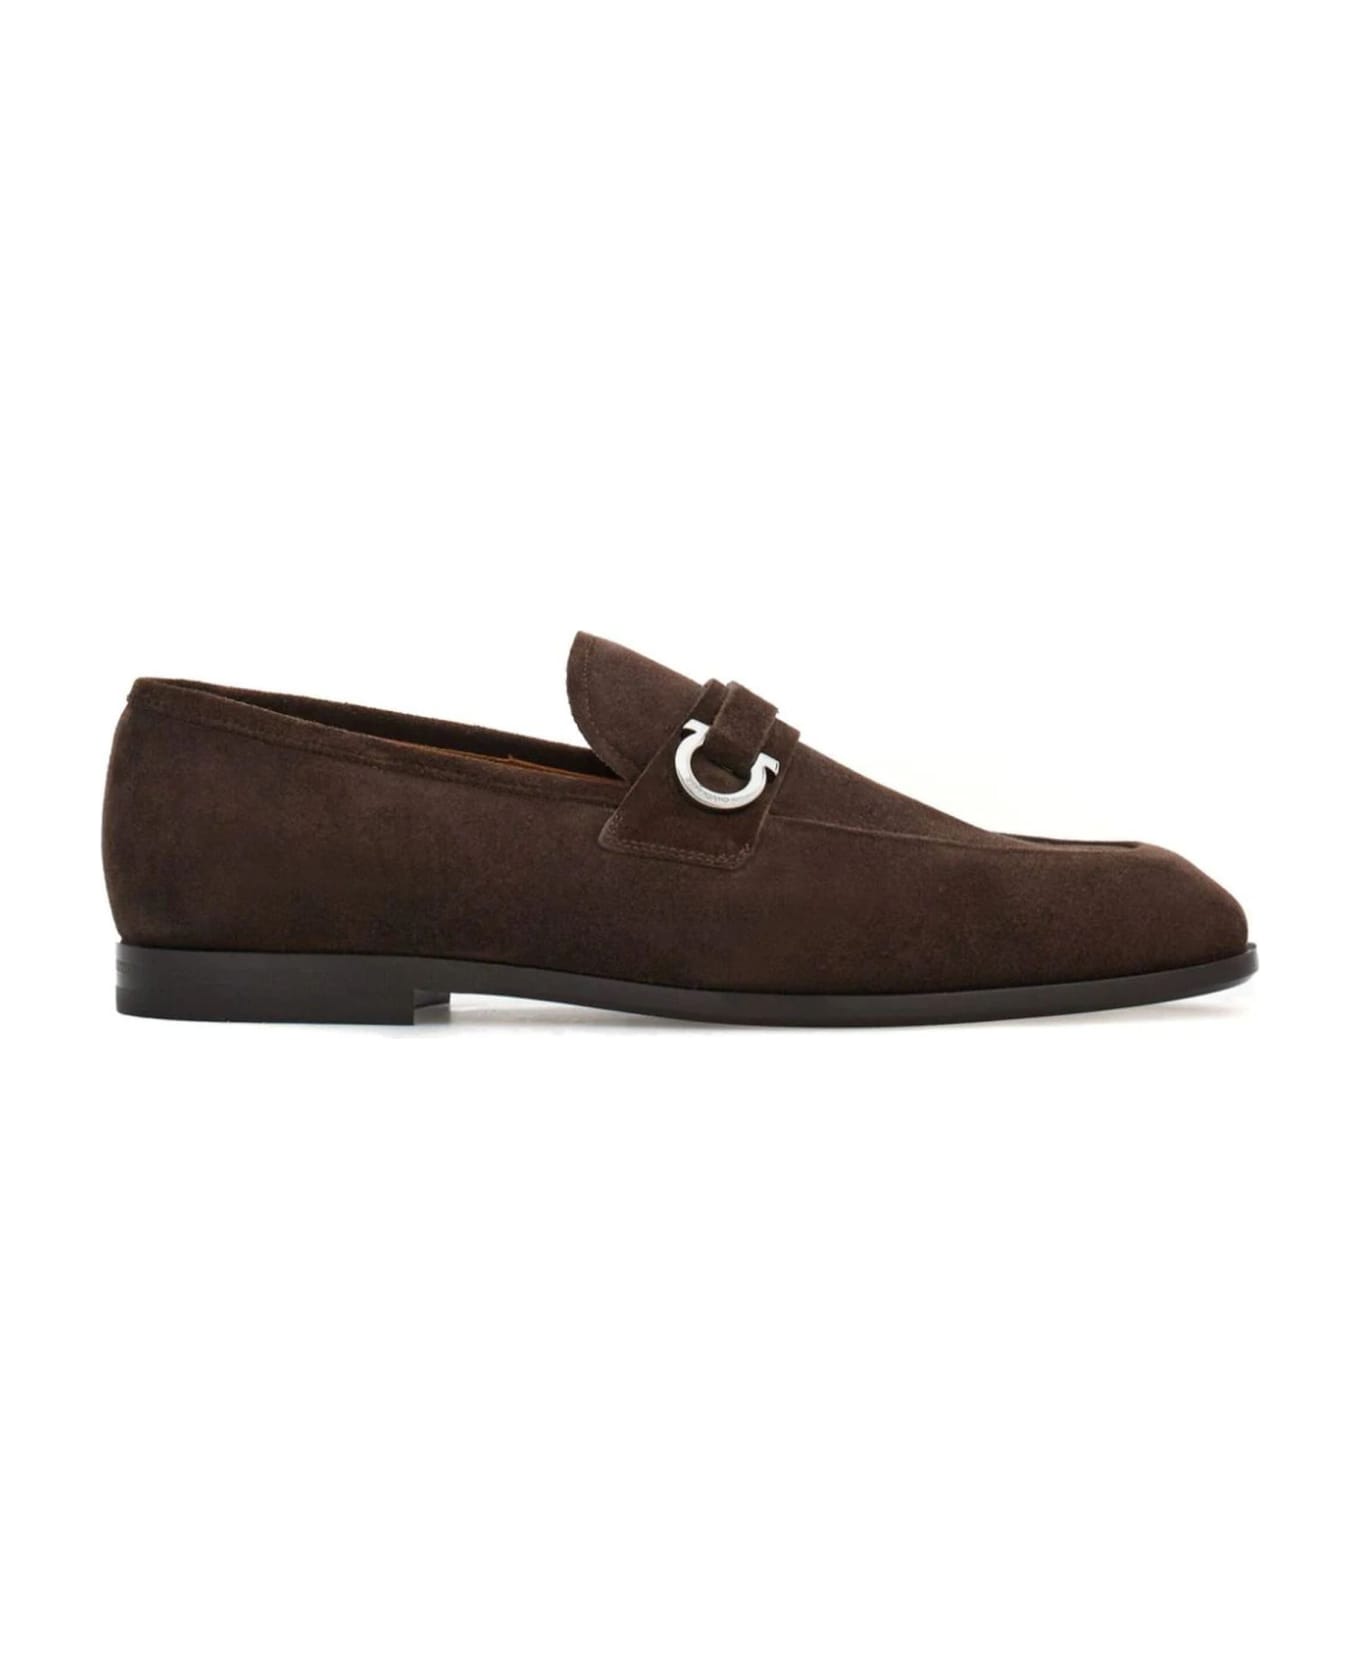 Ferragamo Brown Suede Leather Loafer - Brown